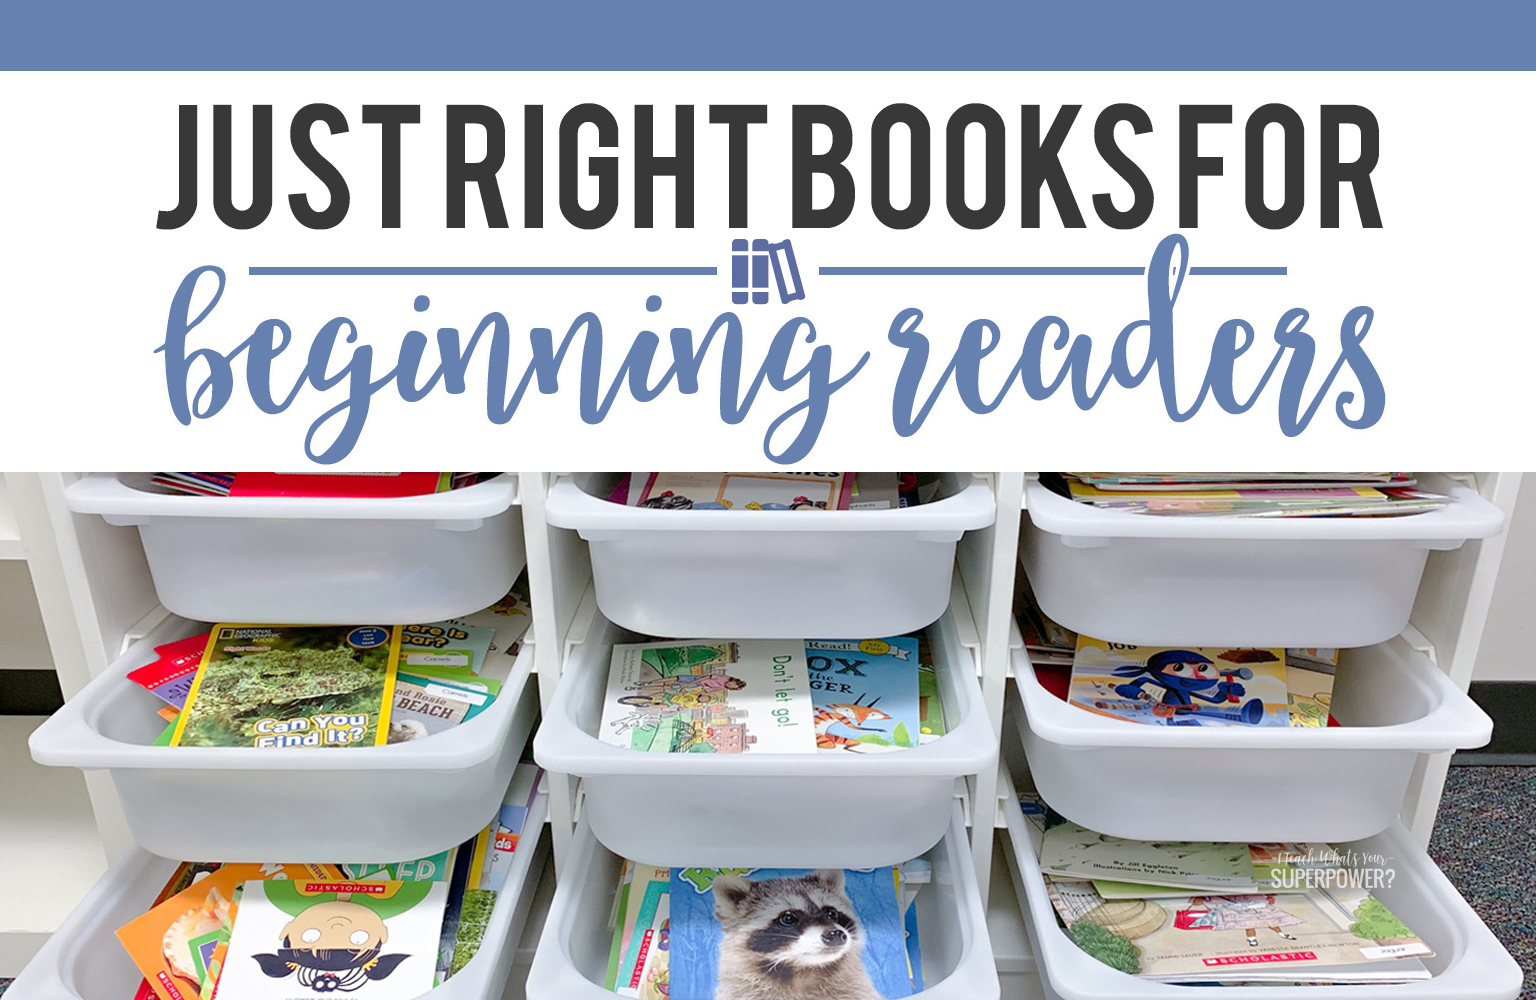 Support beginning readers at home and school by offering them just right books. How to keep it simple and organized and suggestions for low cost ways to begin collecting just right books.